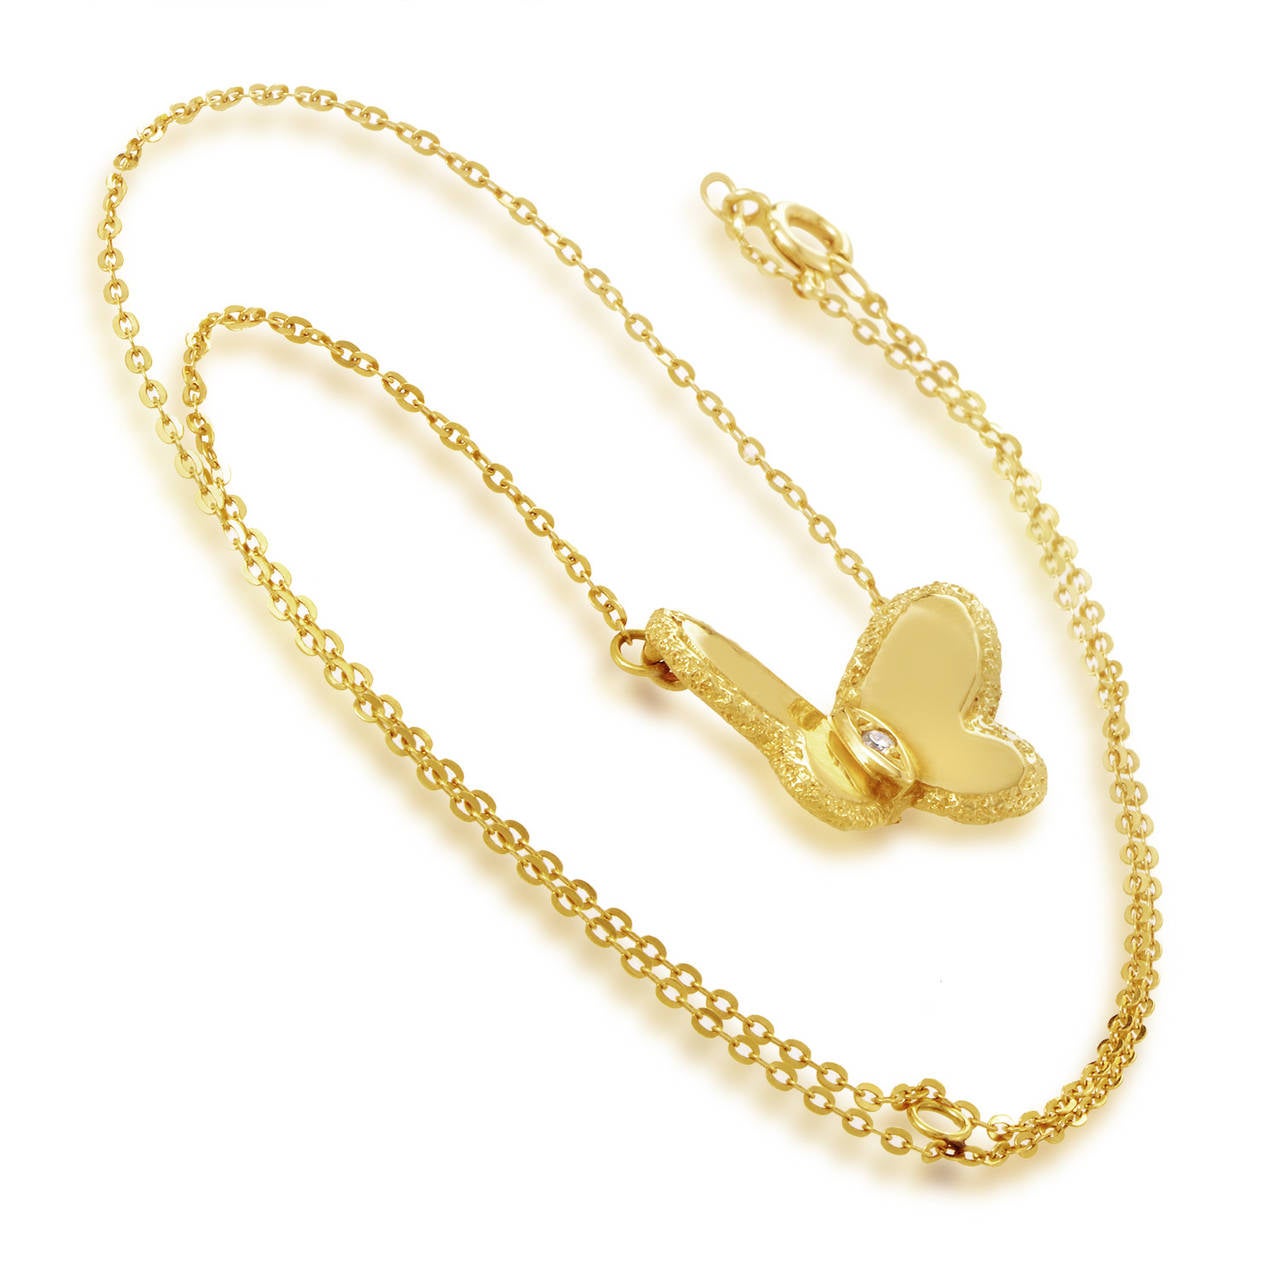 With its butterfly-shaped centerpiece this Van Cleef & Arpels necklace achieves a very charming and feminine appearance. The necklace is made of 18K yellow gold and the butterfly-shaped pendant is set with a single diamond in its